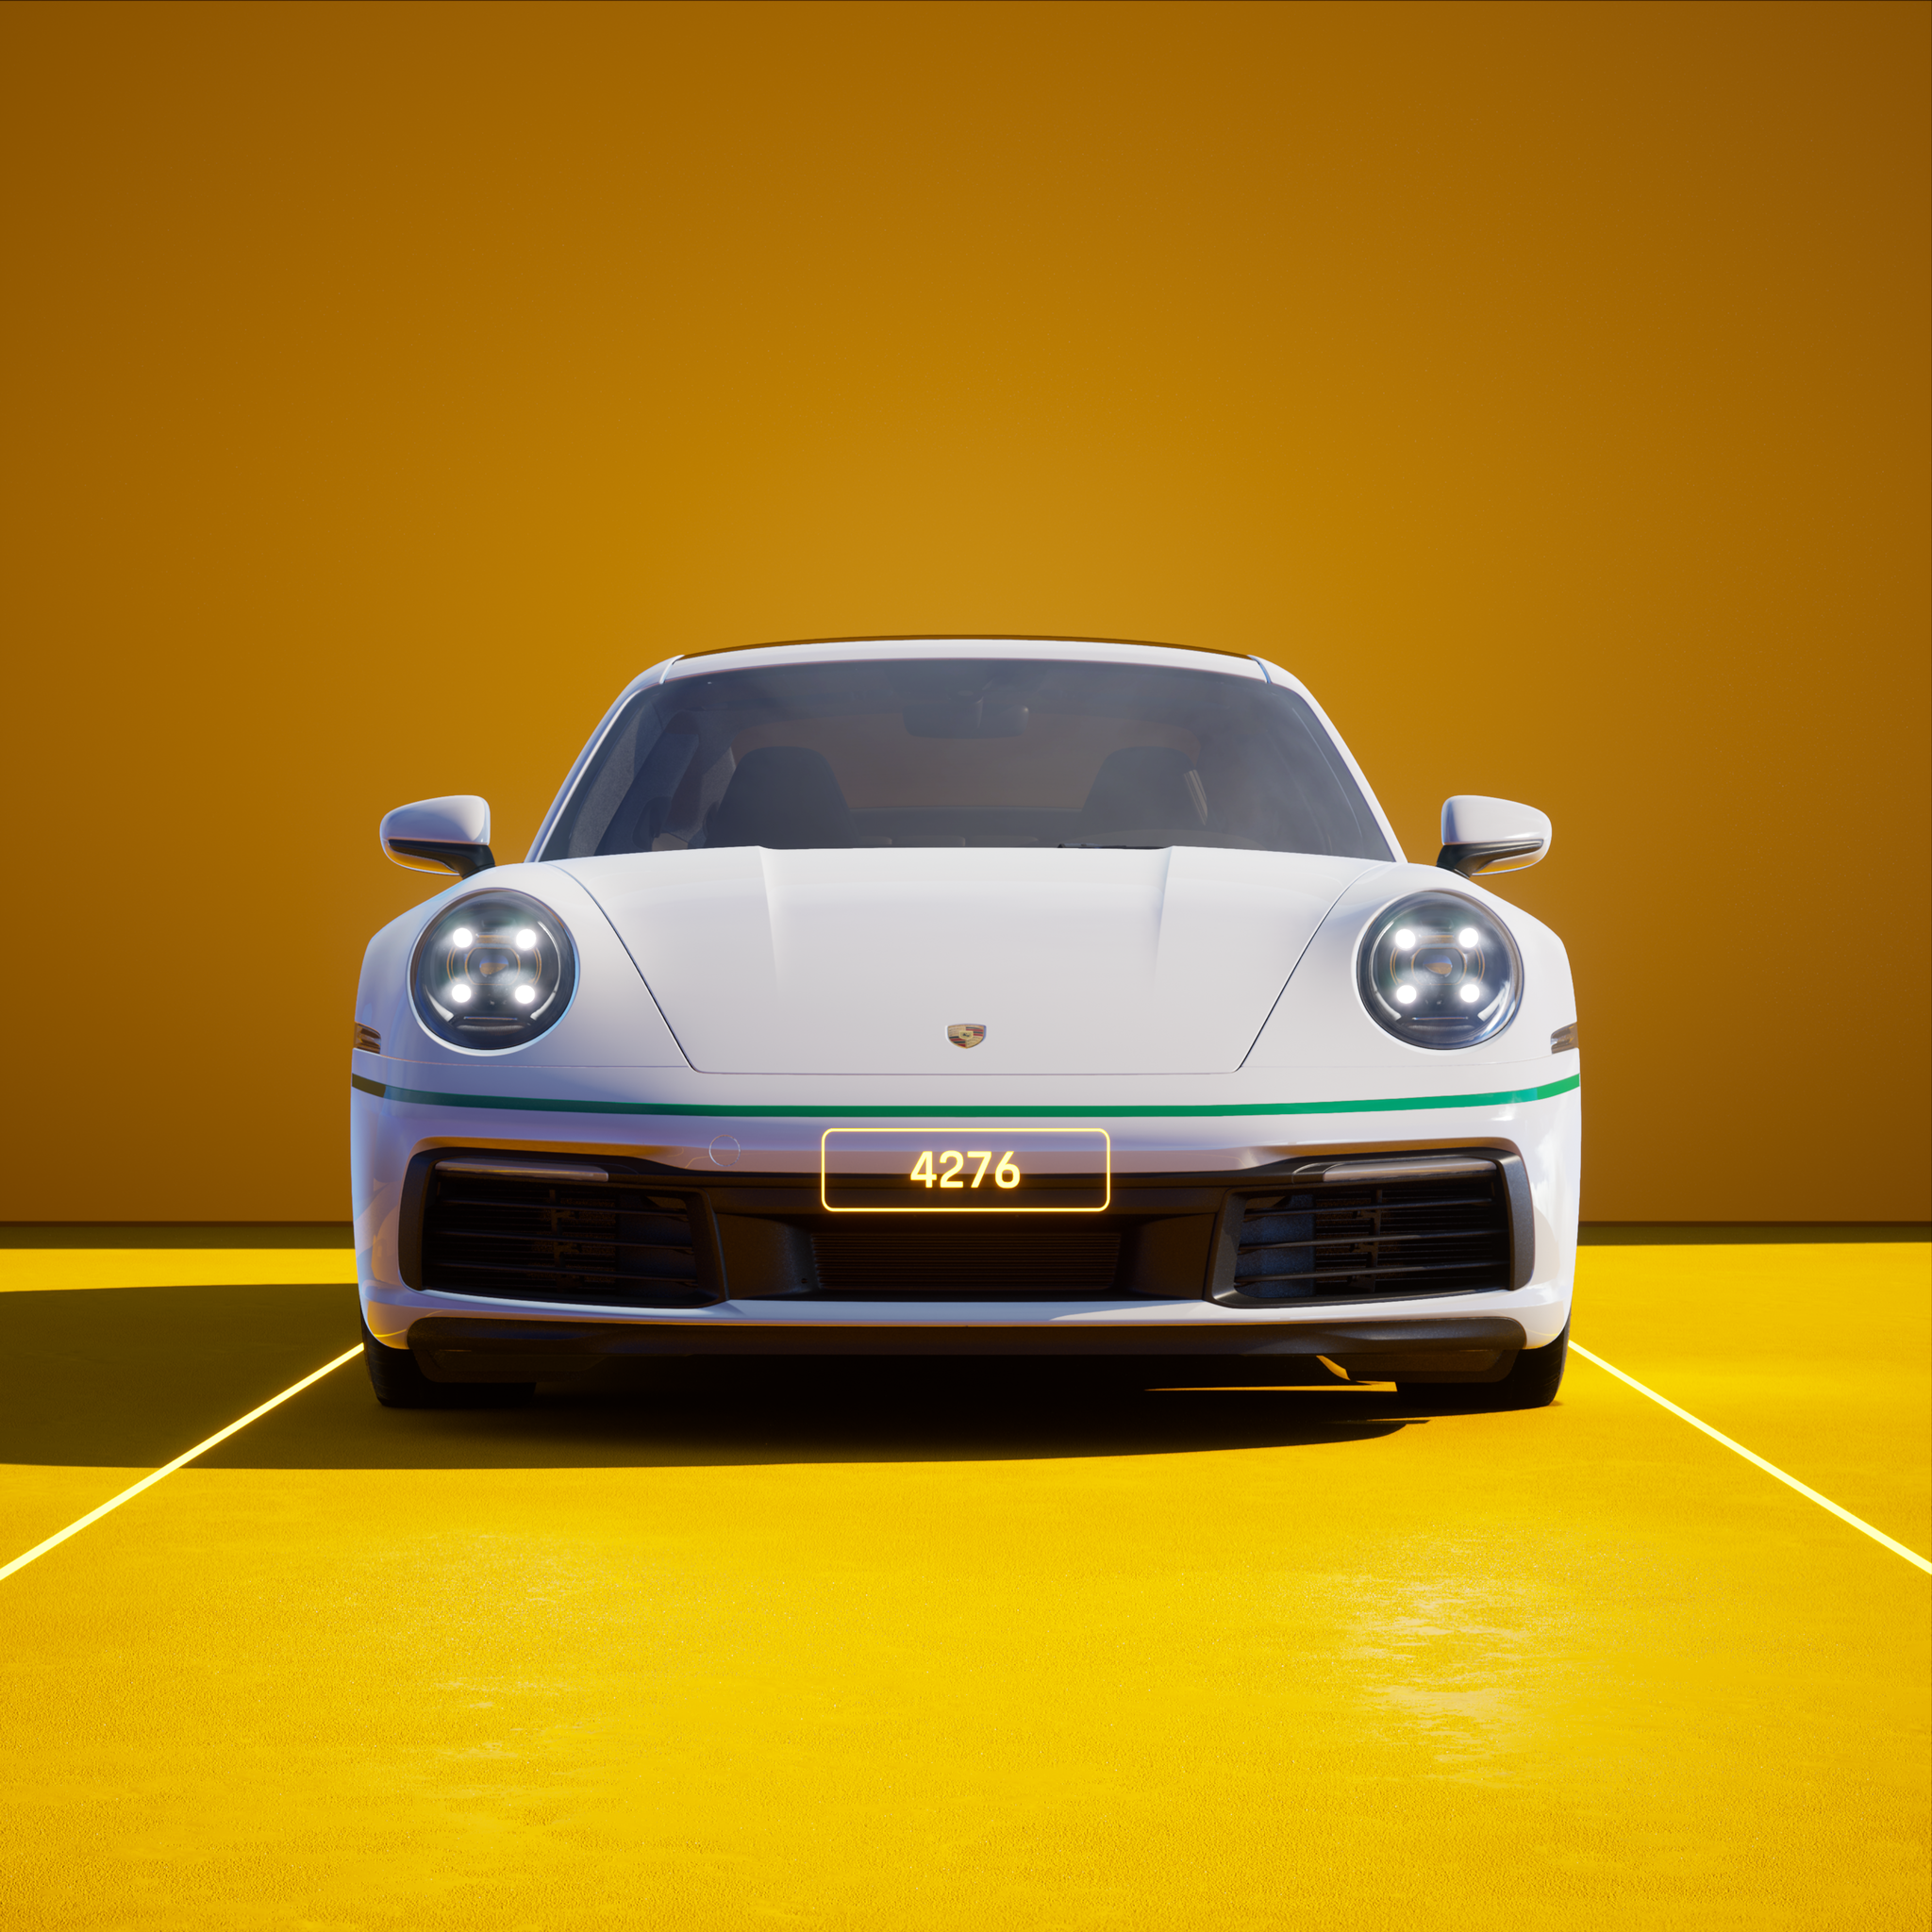 The PORSCHΞ 911 4276 image in phase